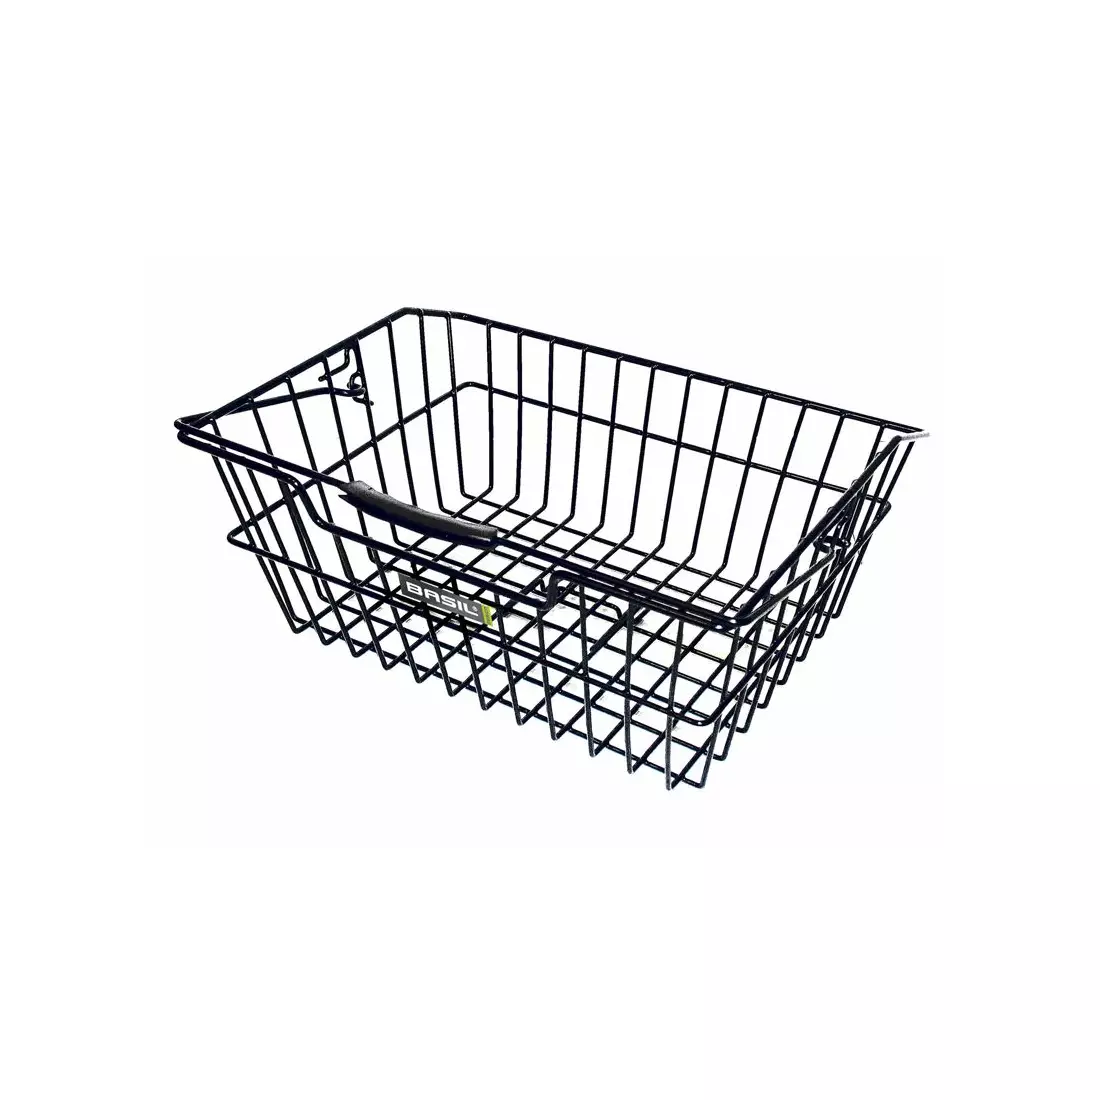 BASIL CAIRO LUXE bicycle basket for the rear carrier + fixing hooks, steel black BAS-11031